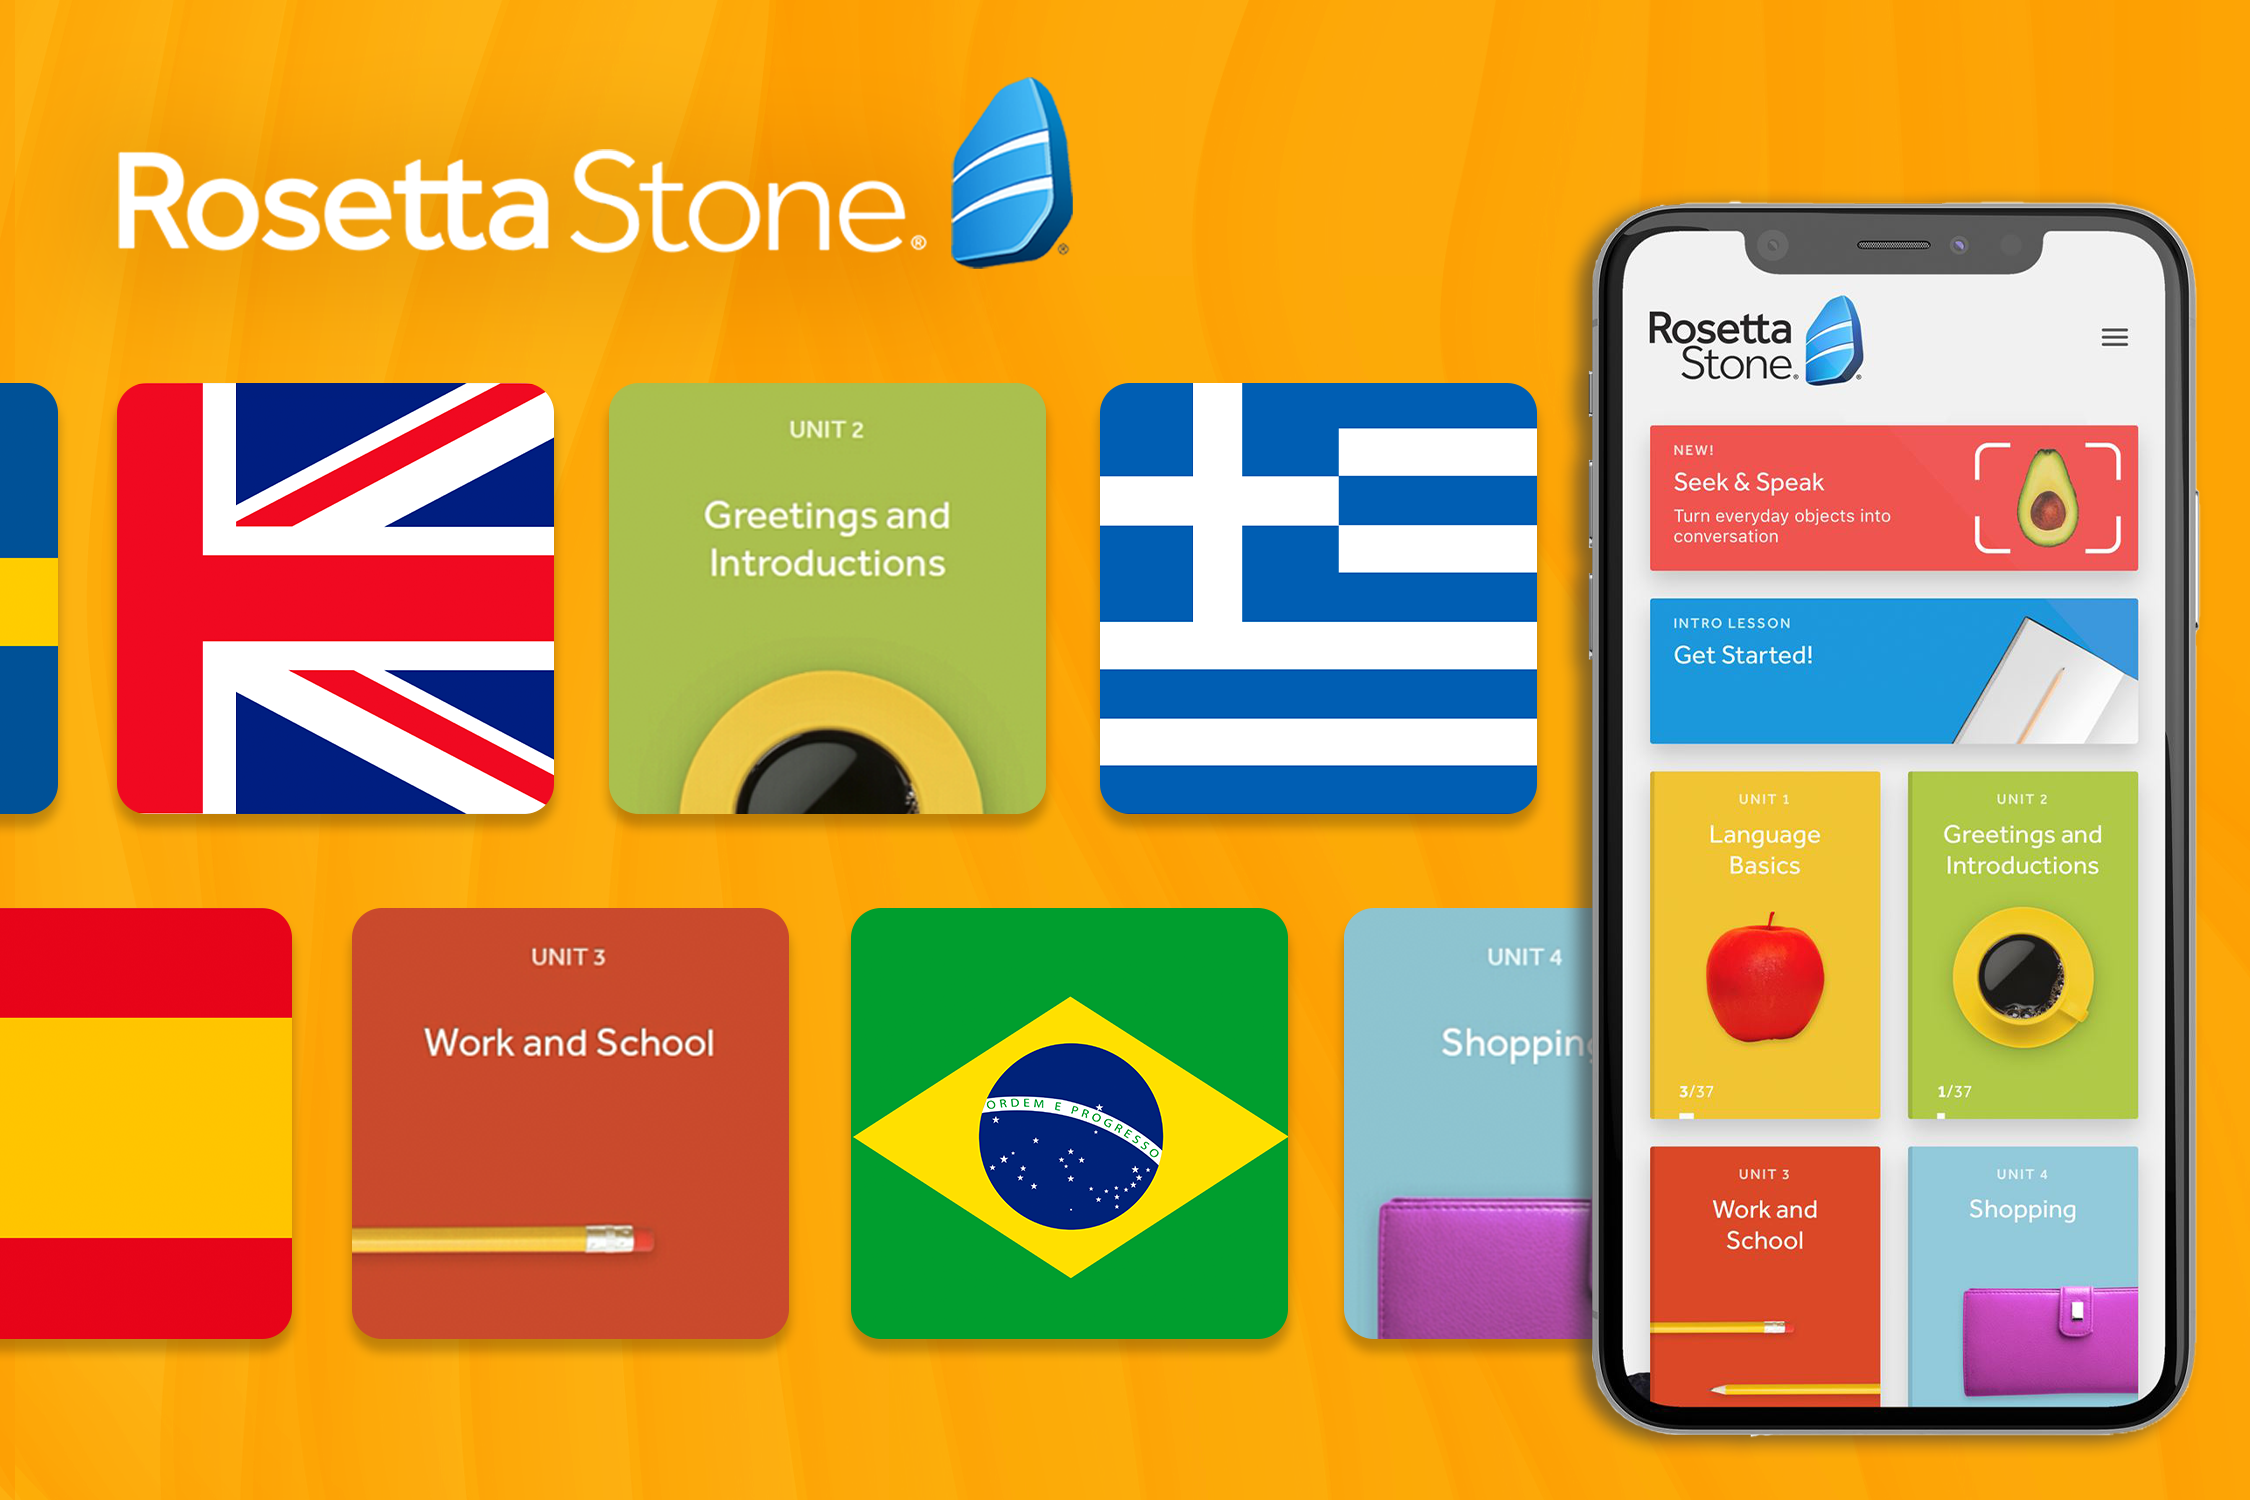 Rosetta Stone empowers you to communicate with more people than ever